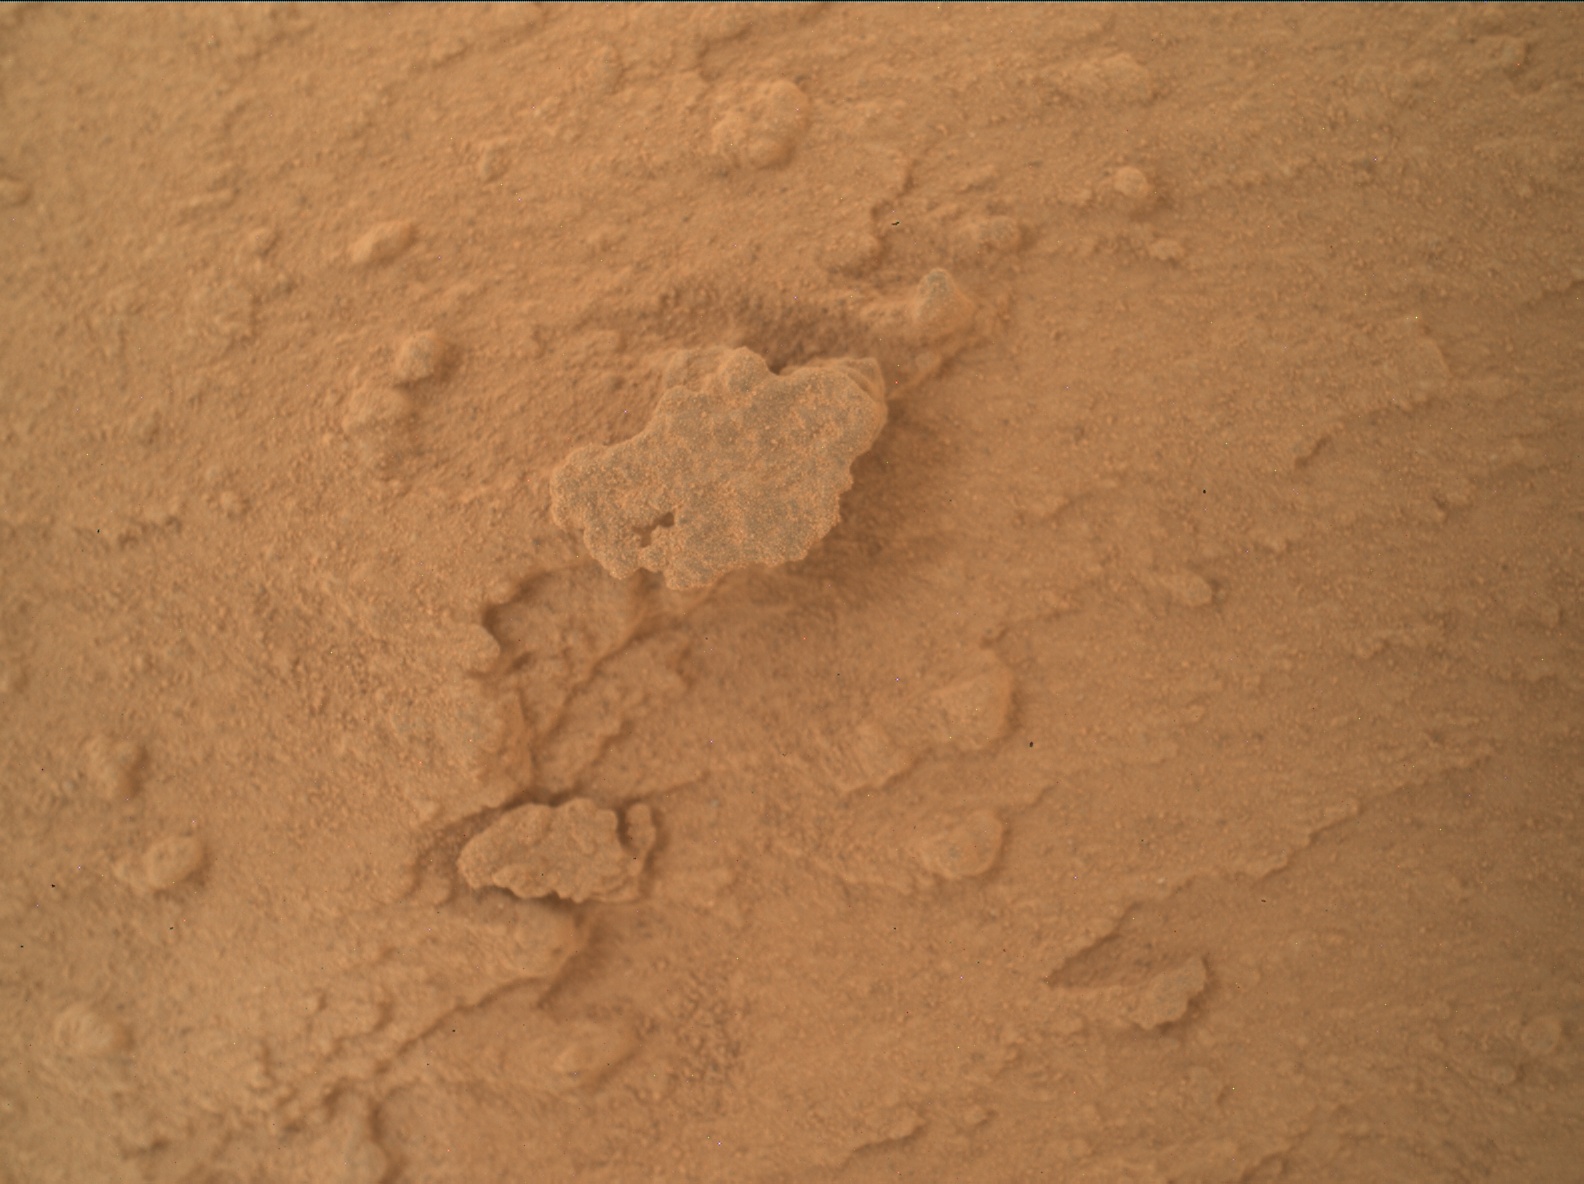 Nasa's Mars rover Curiosity acquired this image using its Mars Hand Lens Imager (MAHLI) on Sol 3821